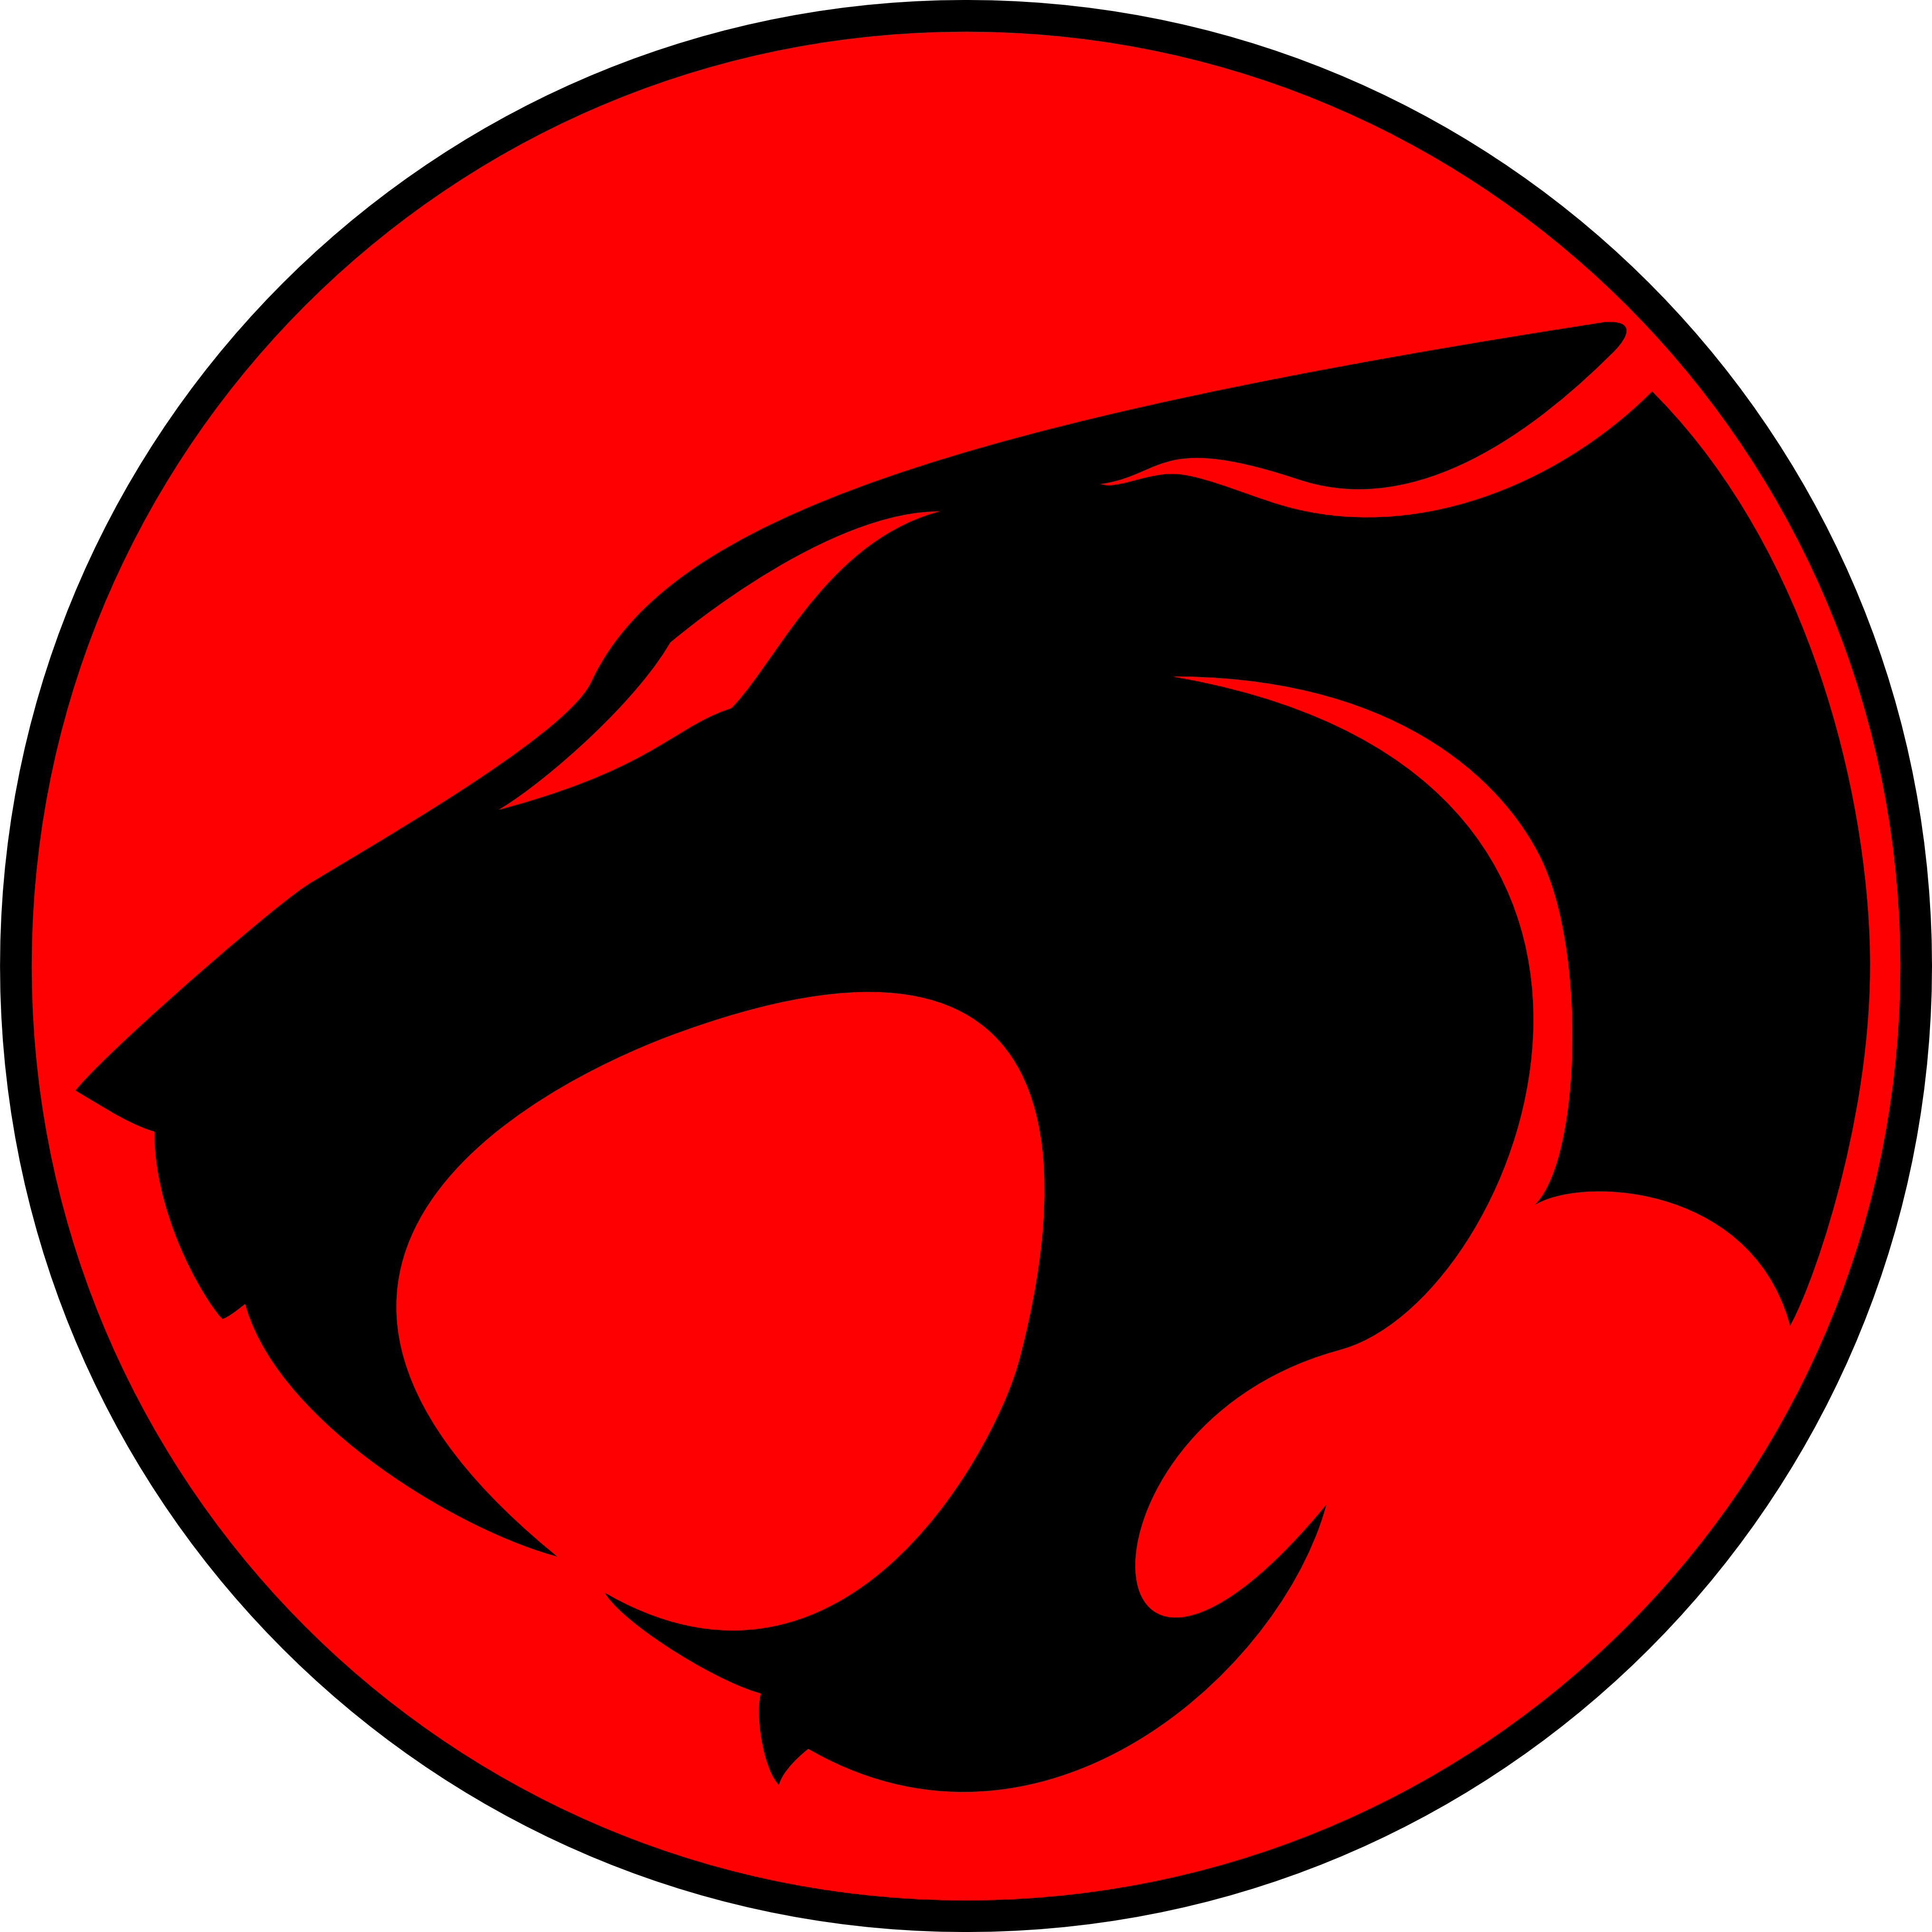 [Image: thundercats_1985_2011_logo_by_pencilshade-d4y2uzr.png]